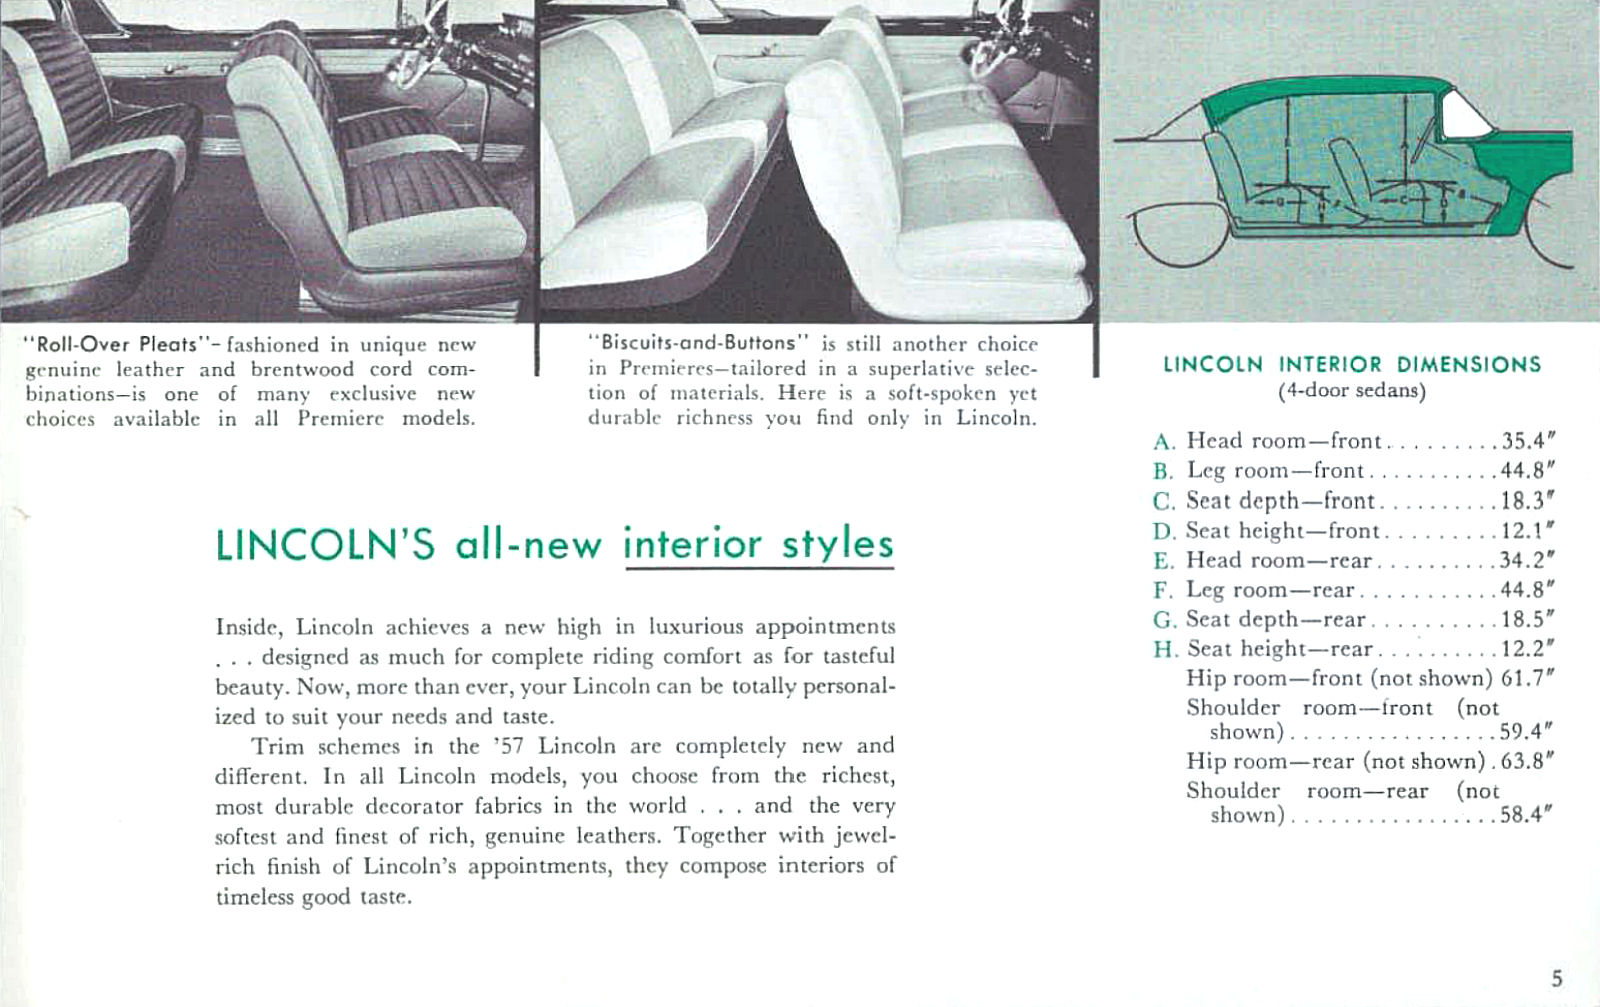 1957 Lincoln Quick Facts-05